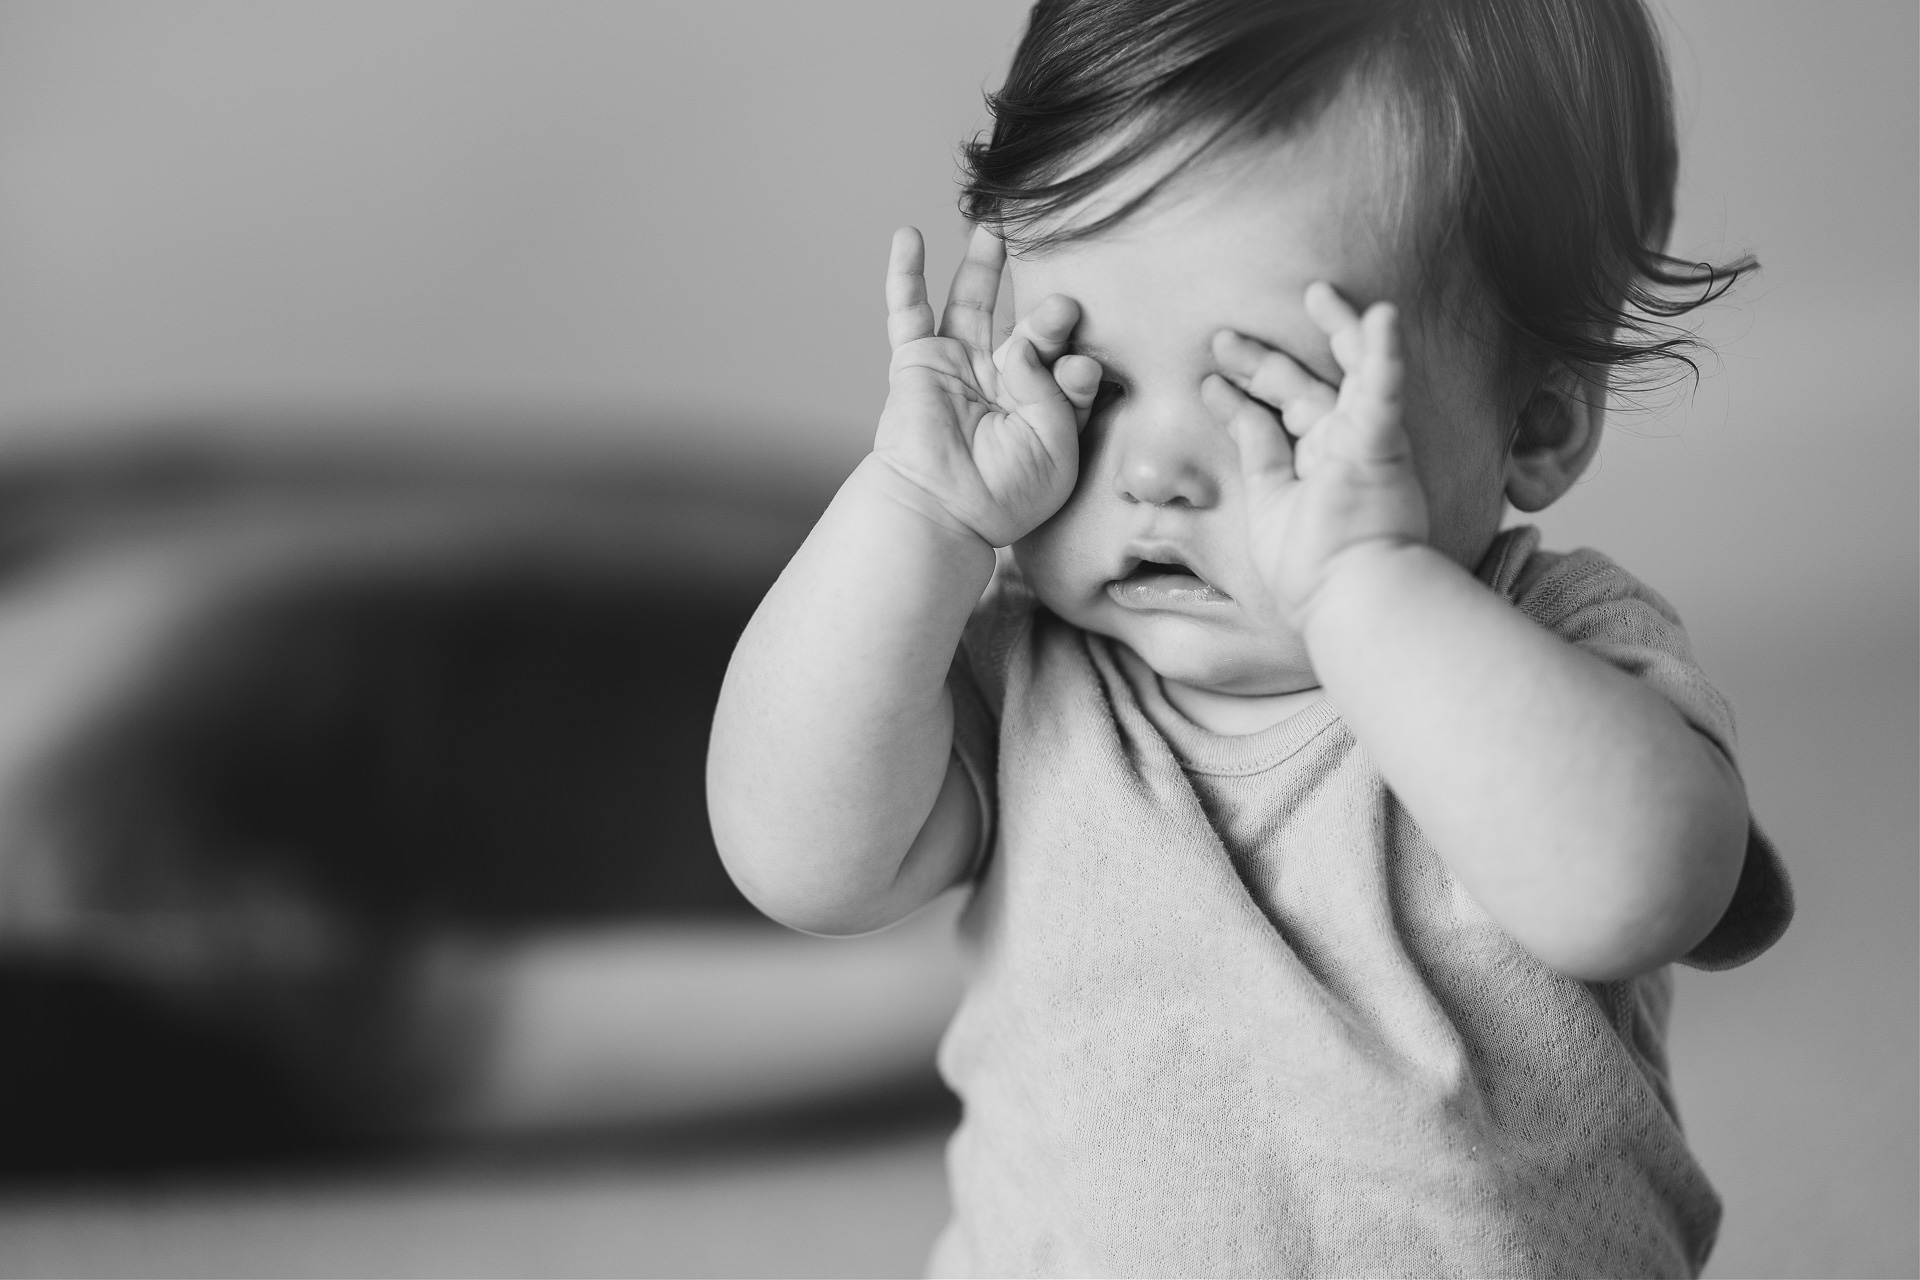 Black & white image of a baby rubbing her eyes